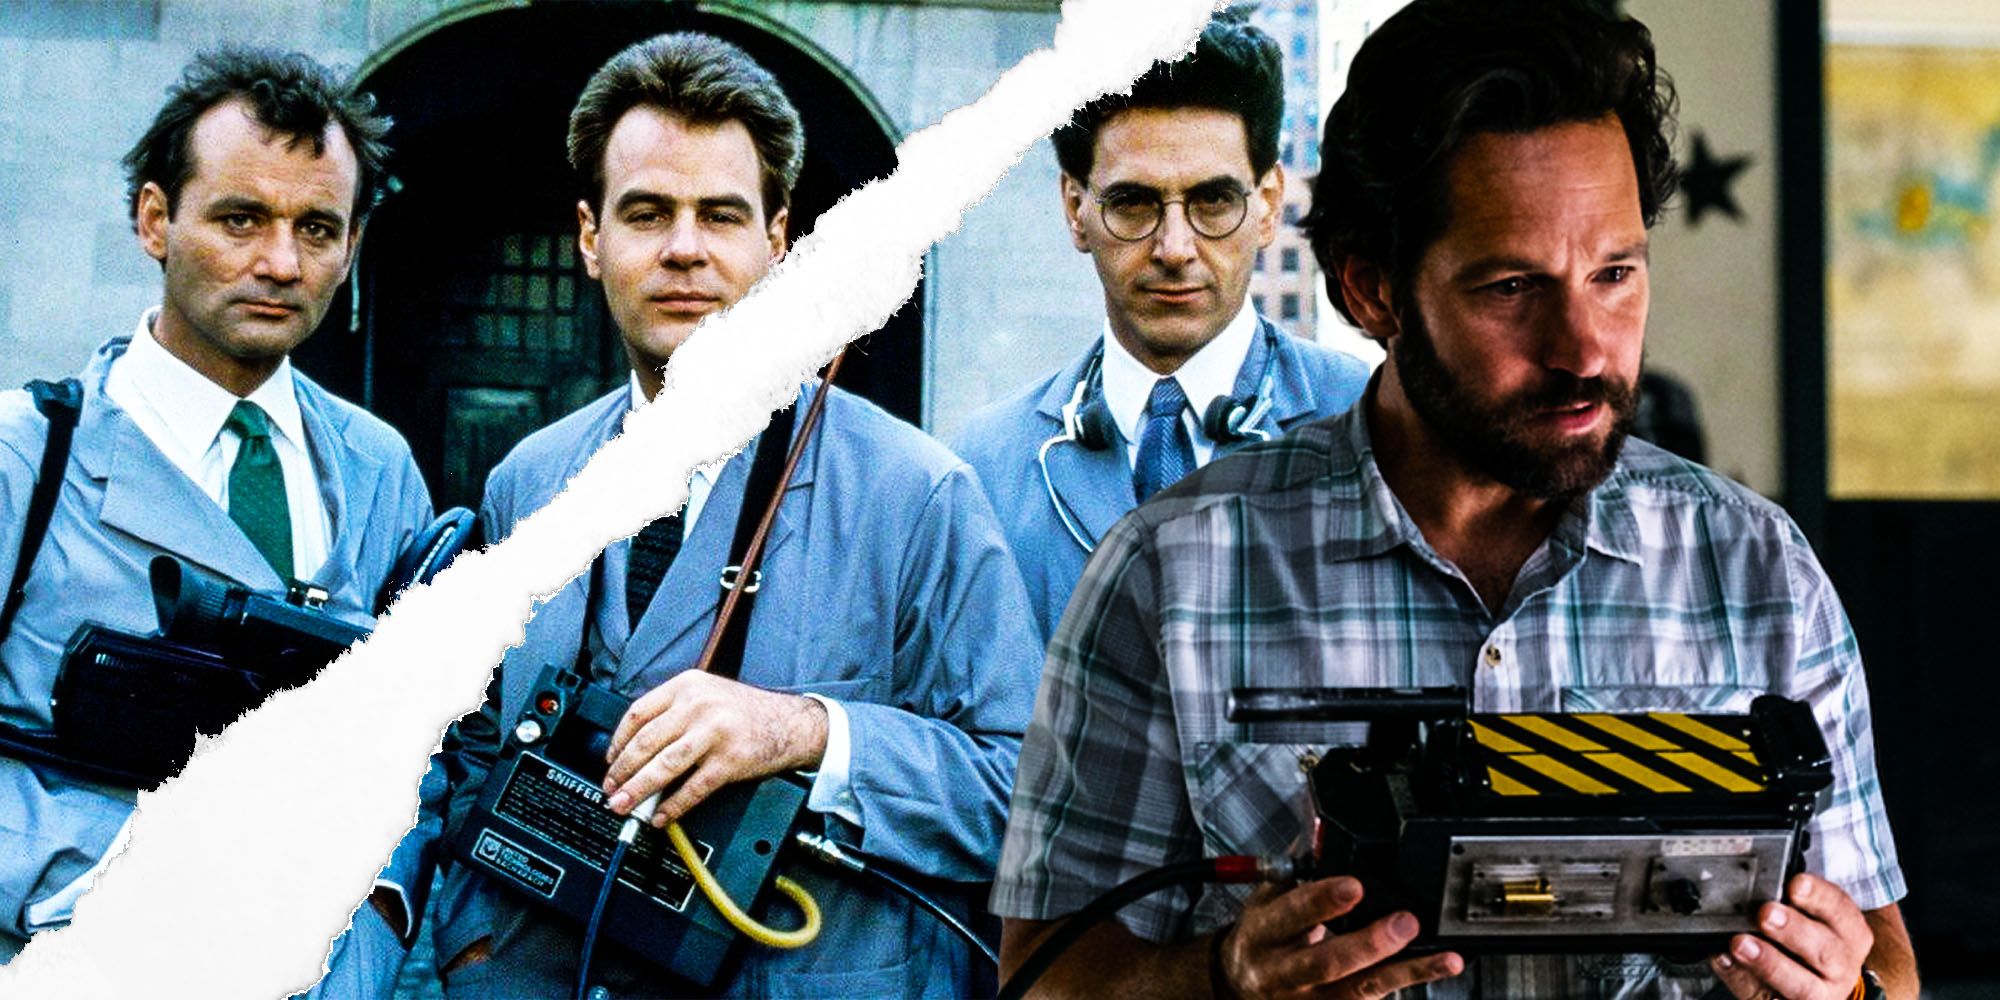 Afterlife Hints The Original Ghostbusters Split Up (Why)